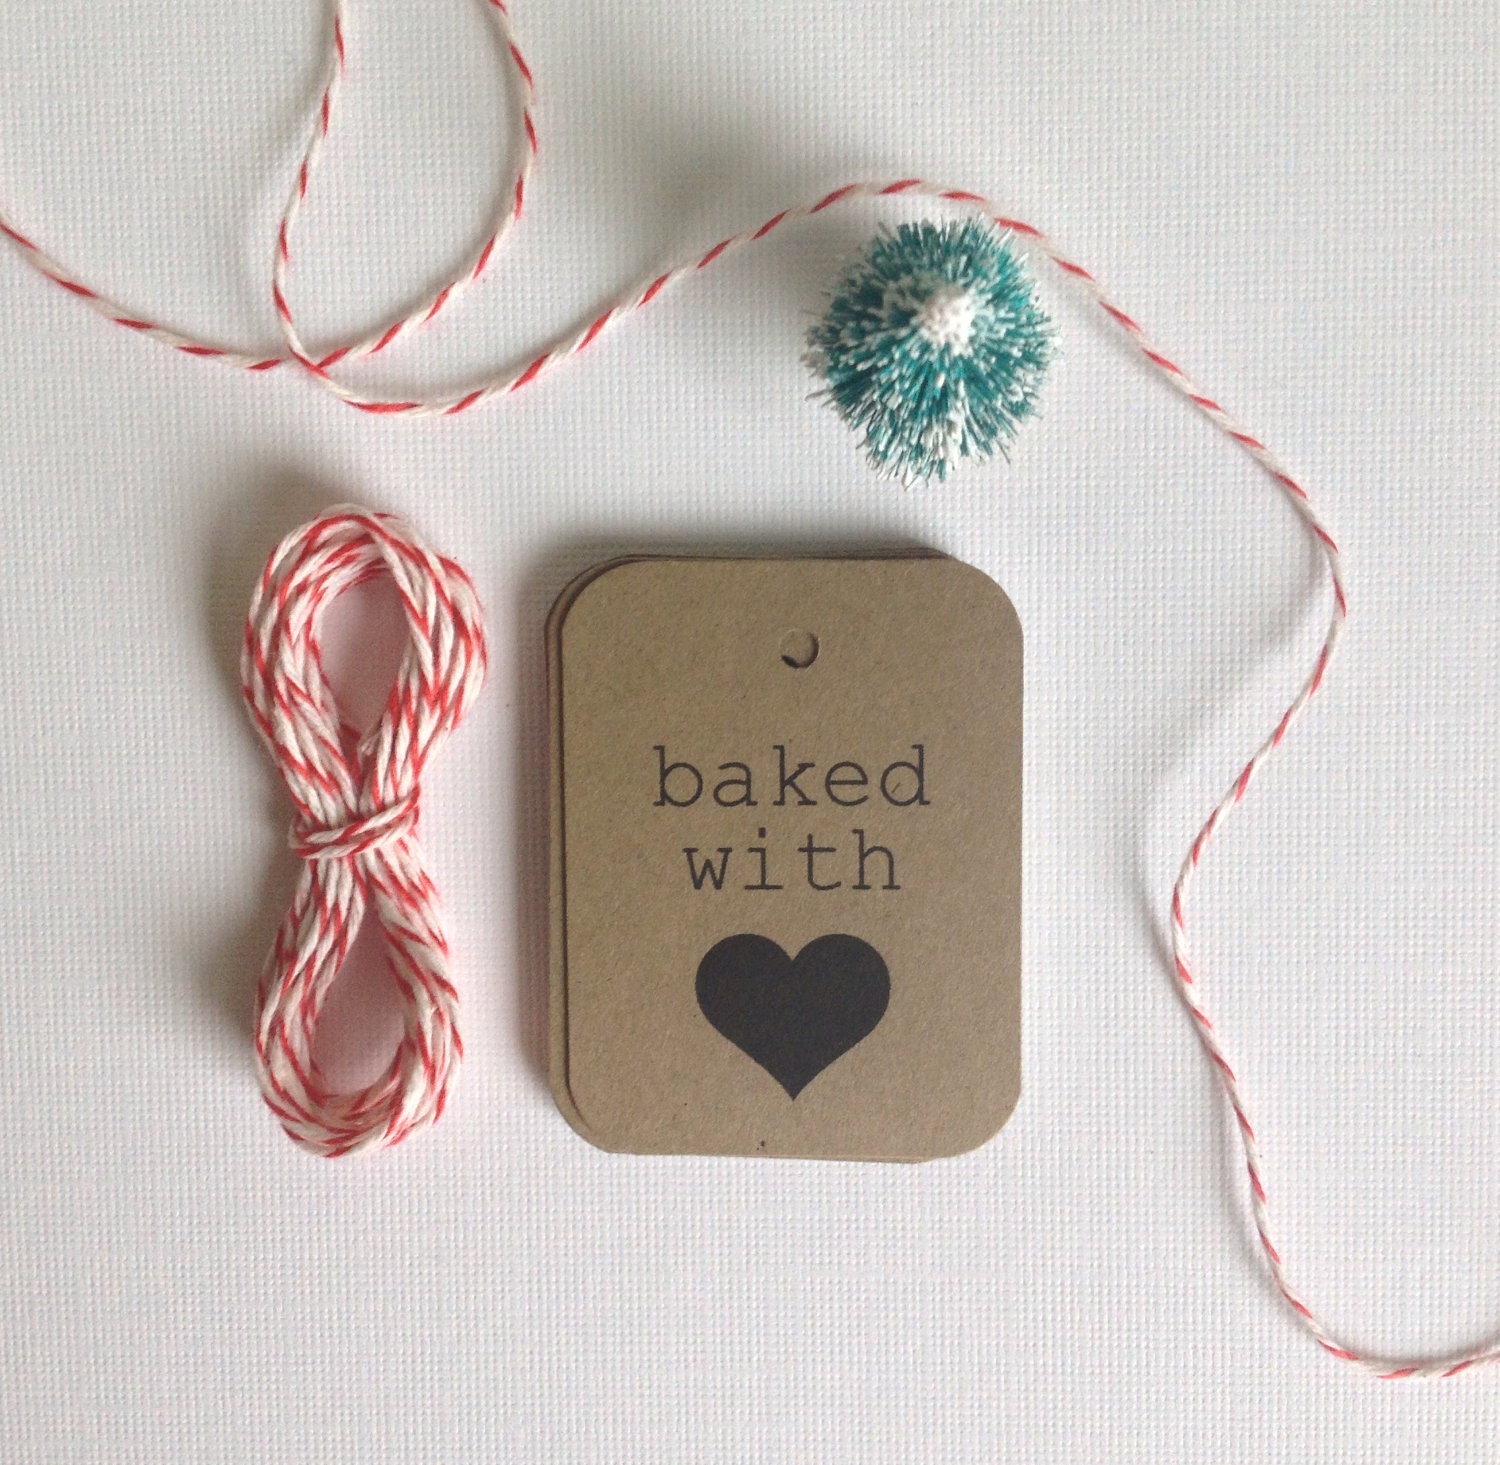 Baked with love tags- gift tags - heart tags - packaging supplies -